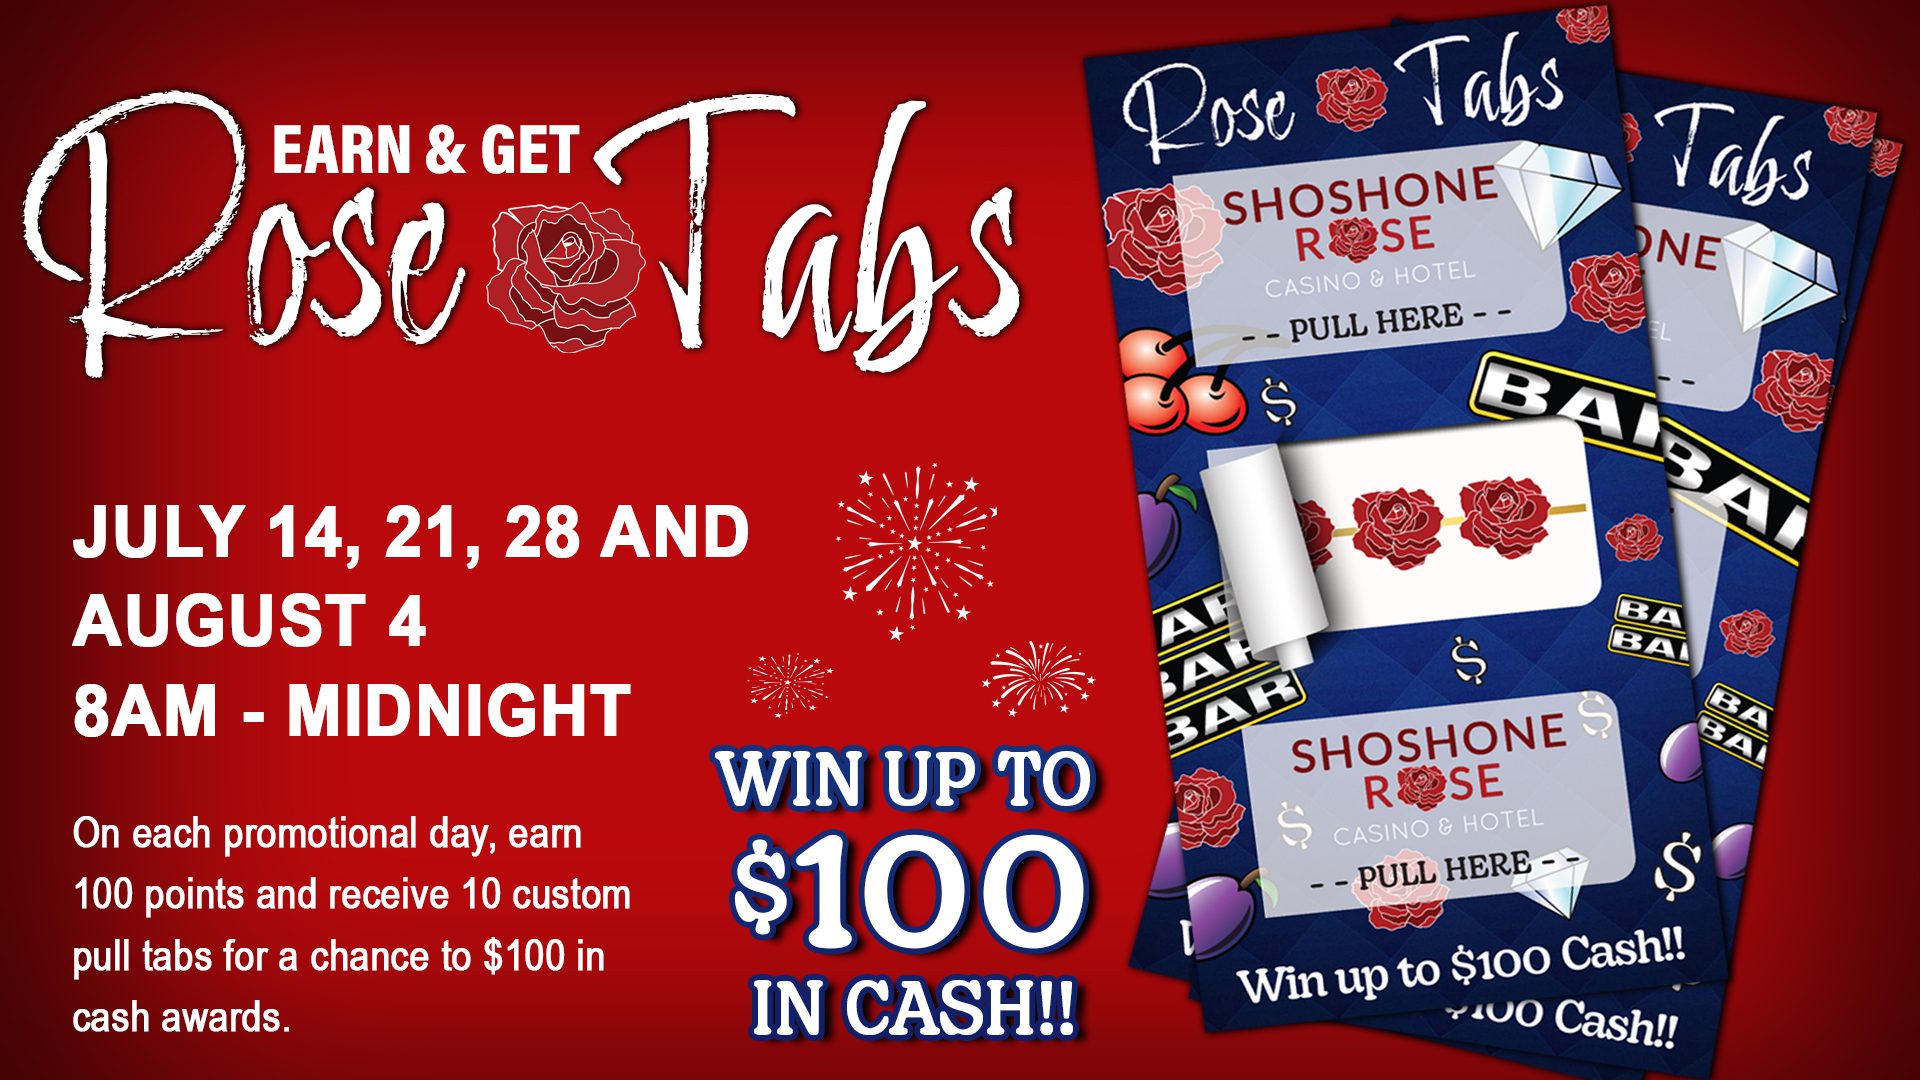 Promotional poster for "rose tabs" casino event with dates, prizes, and conditions detailed.